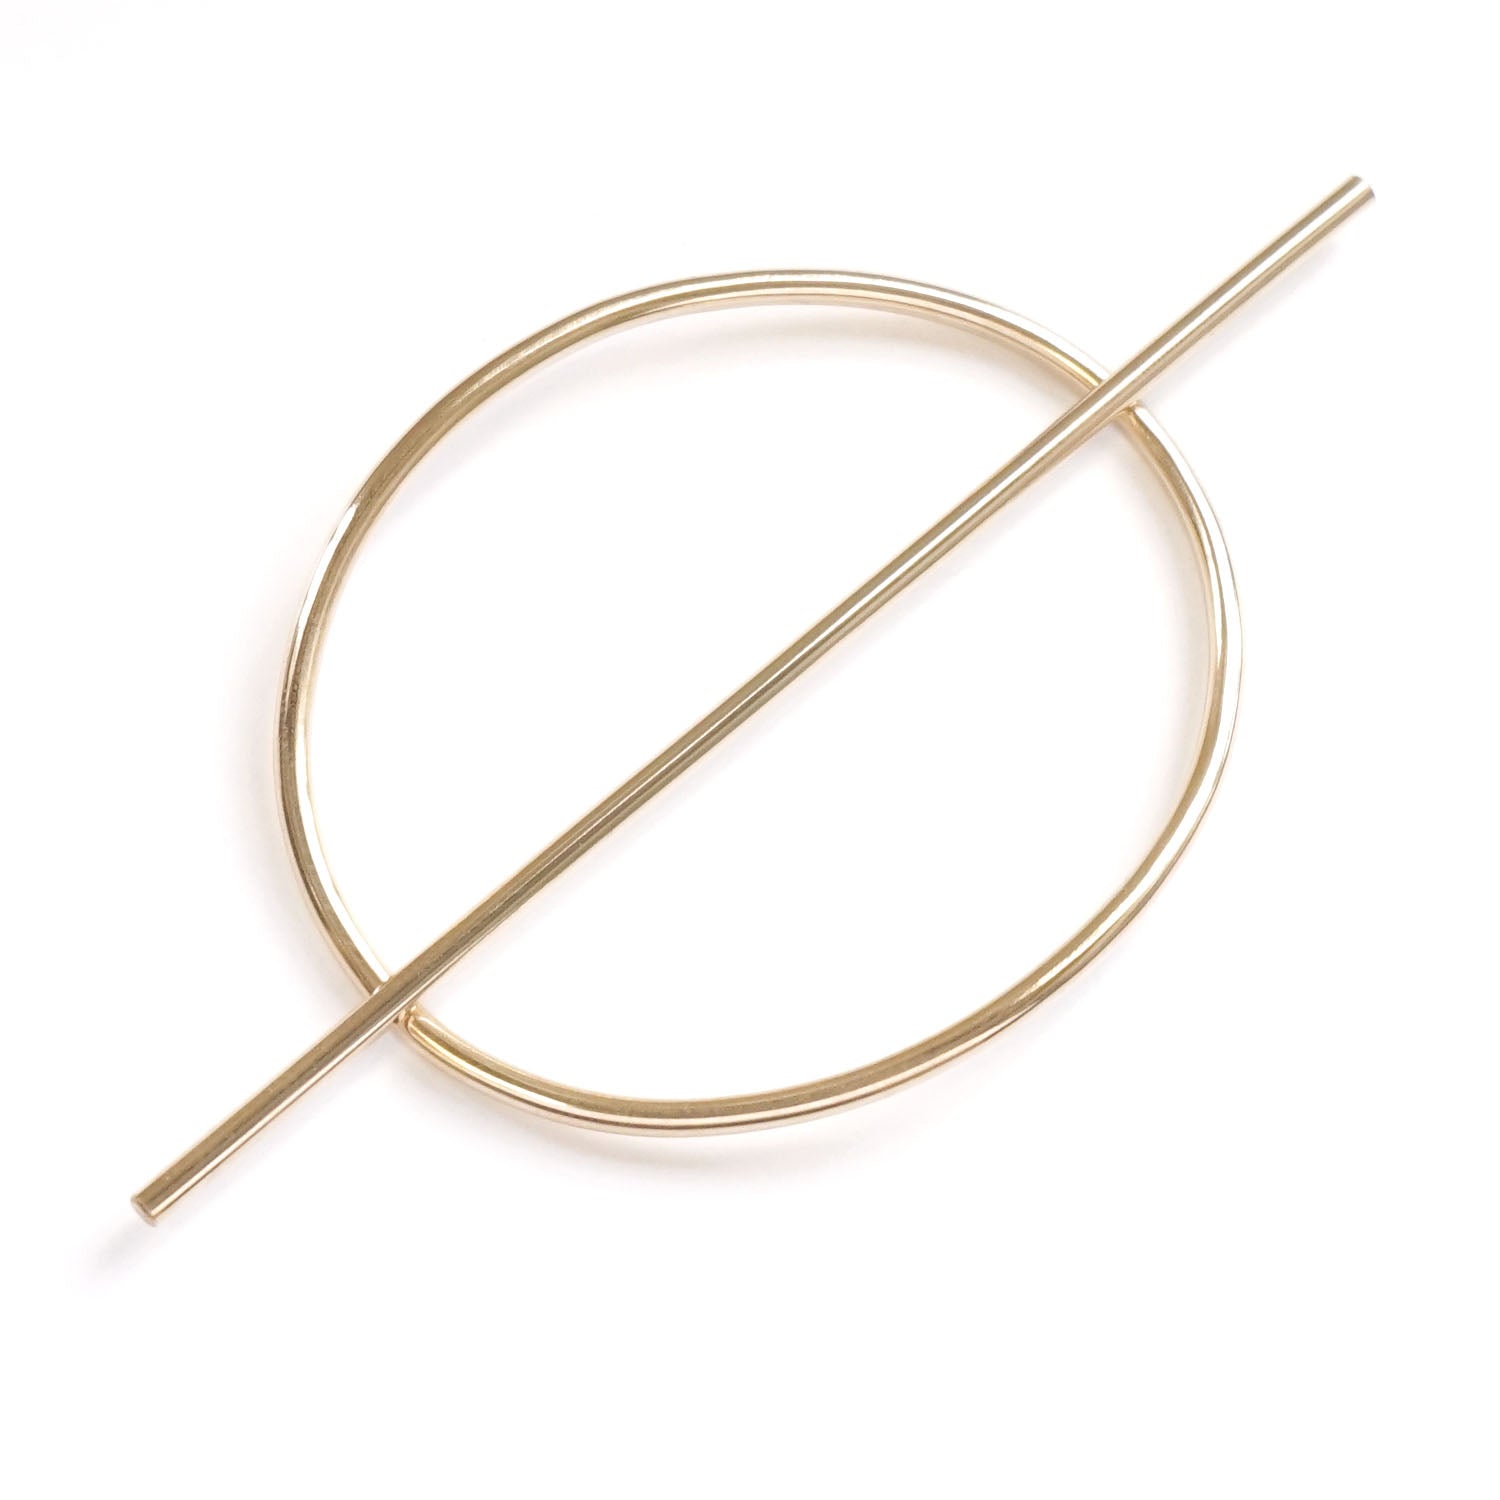 Orbital Hair Pin for Curly & Thick Hair - Favor Jewelry